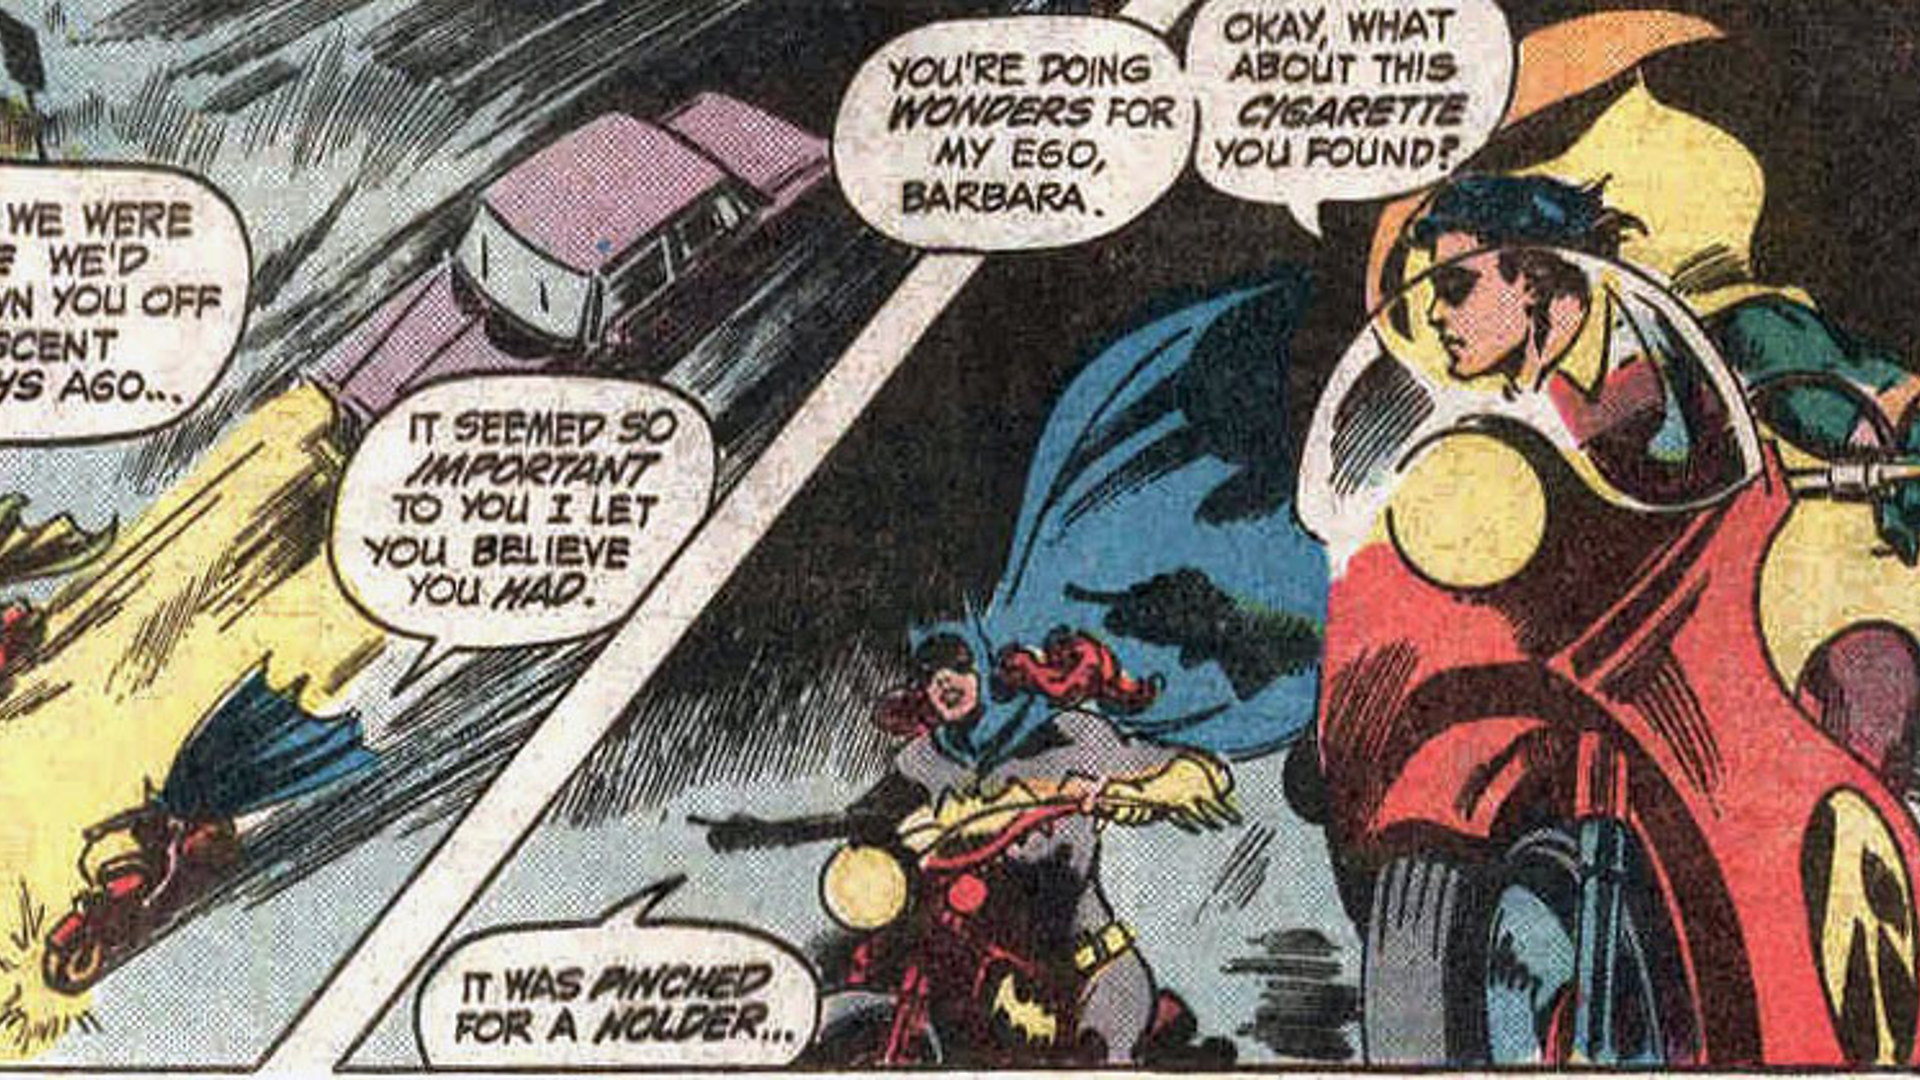 Where Batman rates a series of cars, his partners merited no such consideration. Pretty much since his first appearance, Robin has scooted around on a motorcycle – amazing when you consider he was initially an eight-year-old boy (later writers aged him into his teens). Meanwhile, Batgirl got a very similar bike when she patrolled the streets.